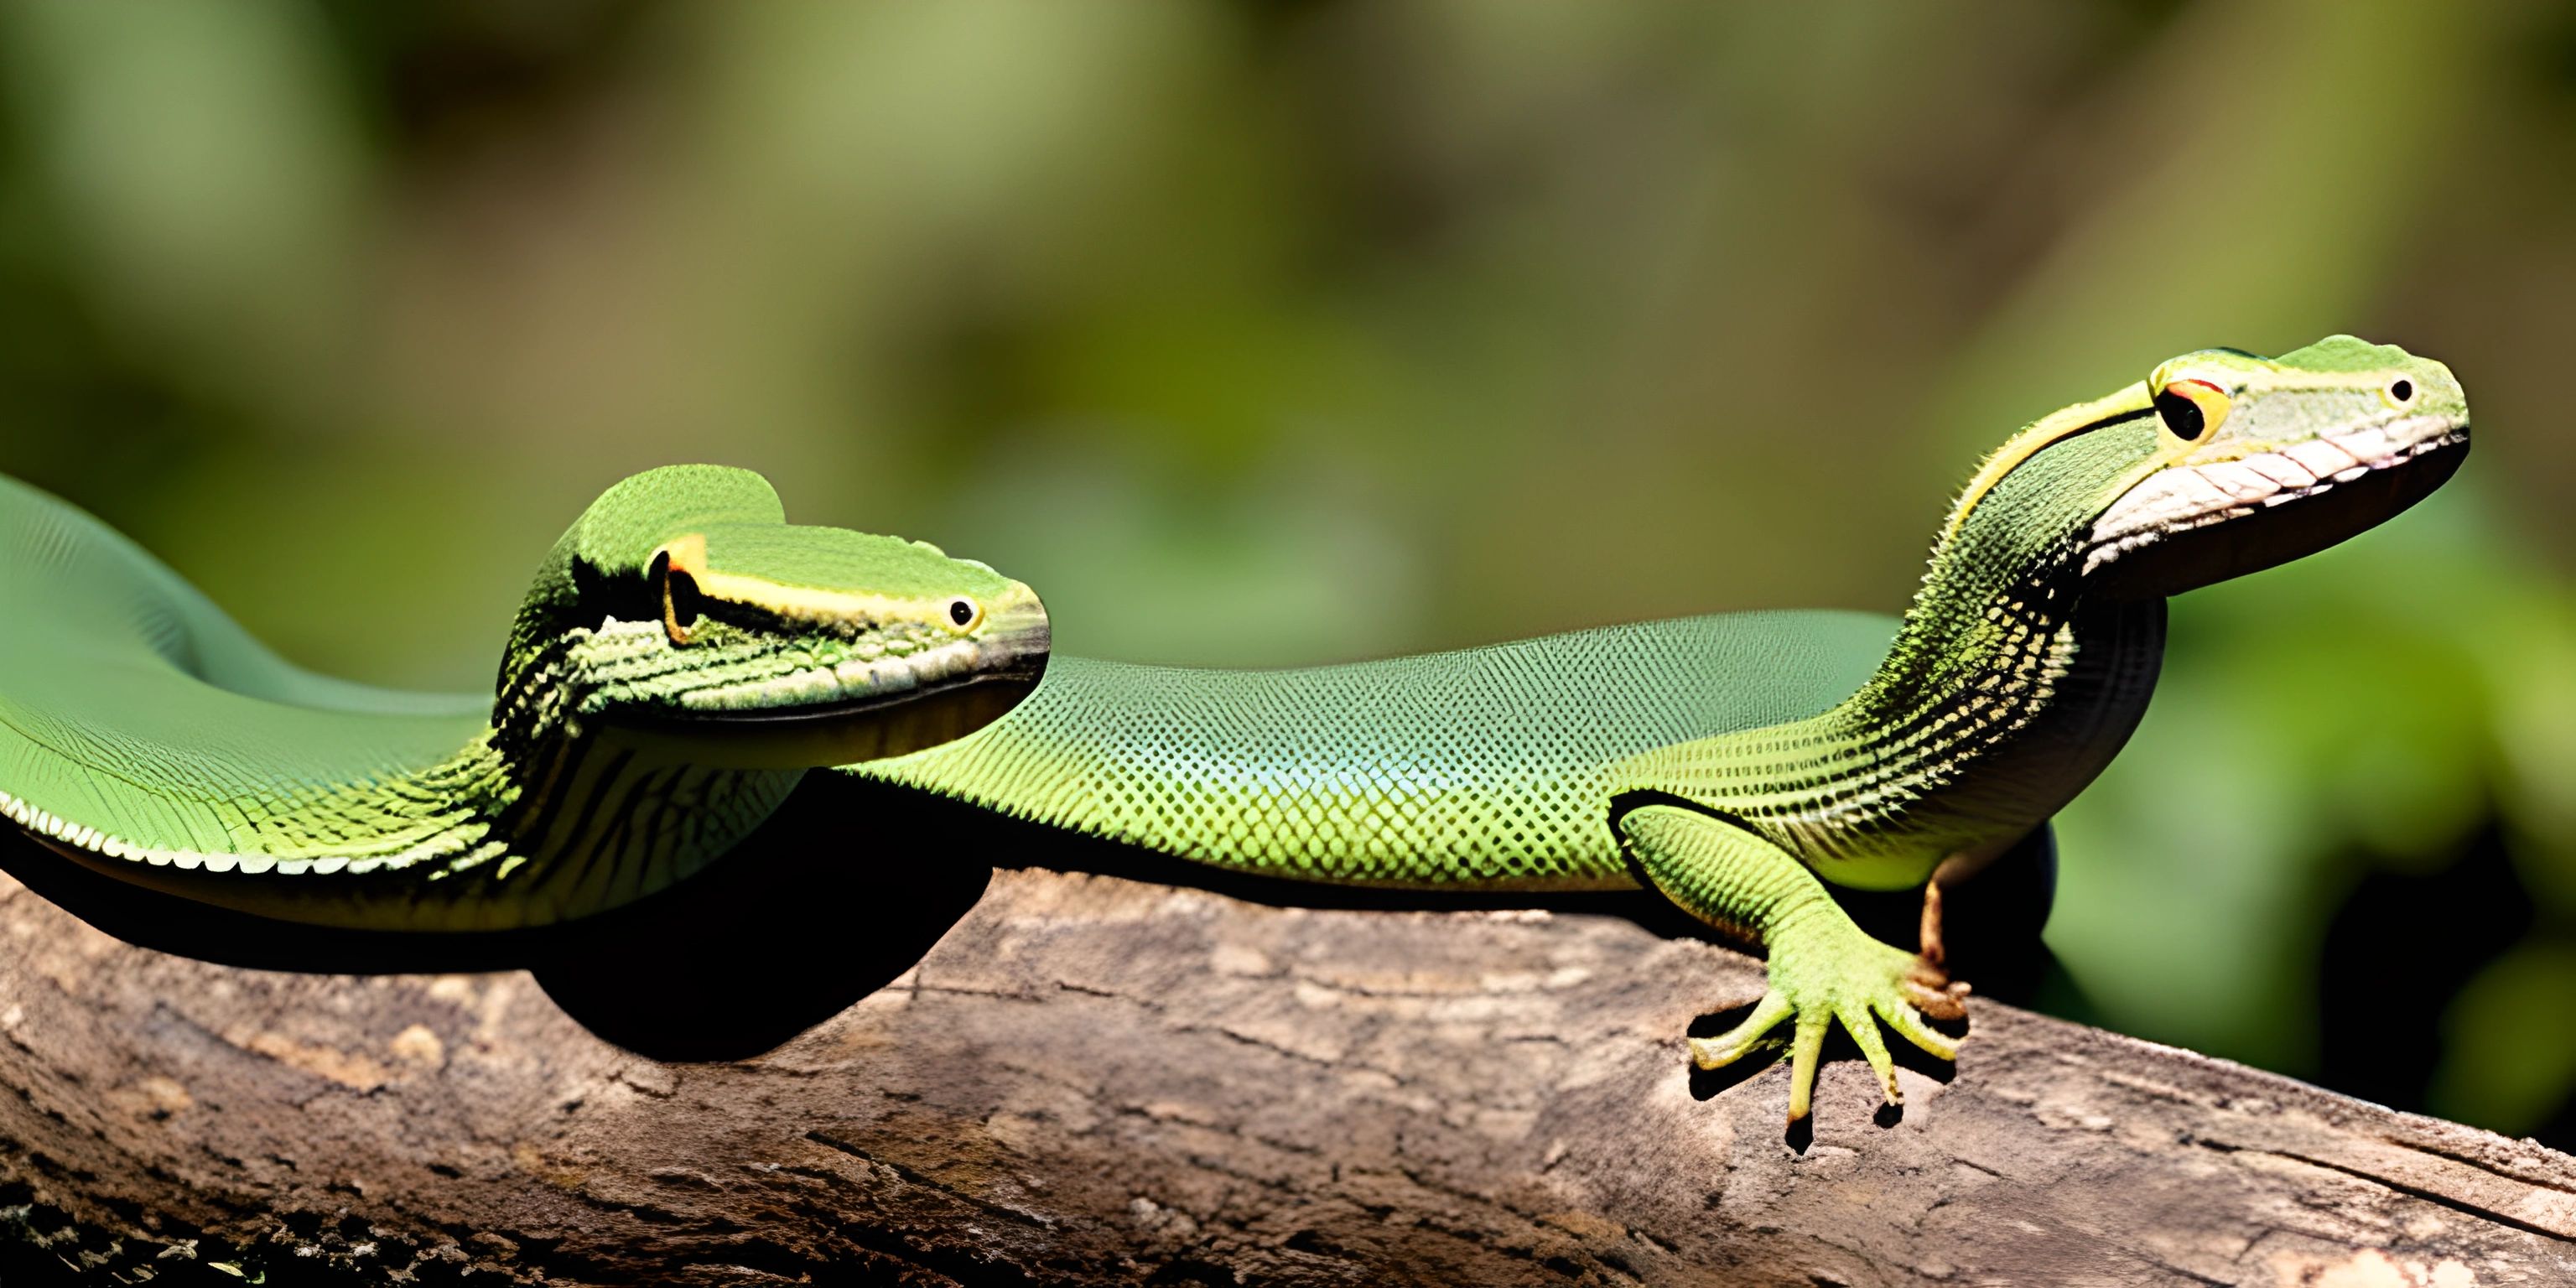 the green snake is resting on the twig on the branch of the tree branch